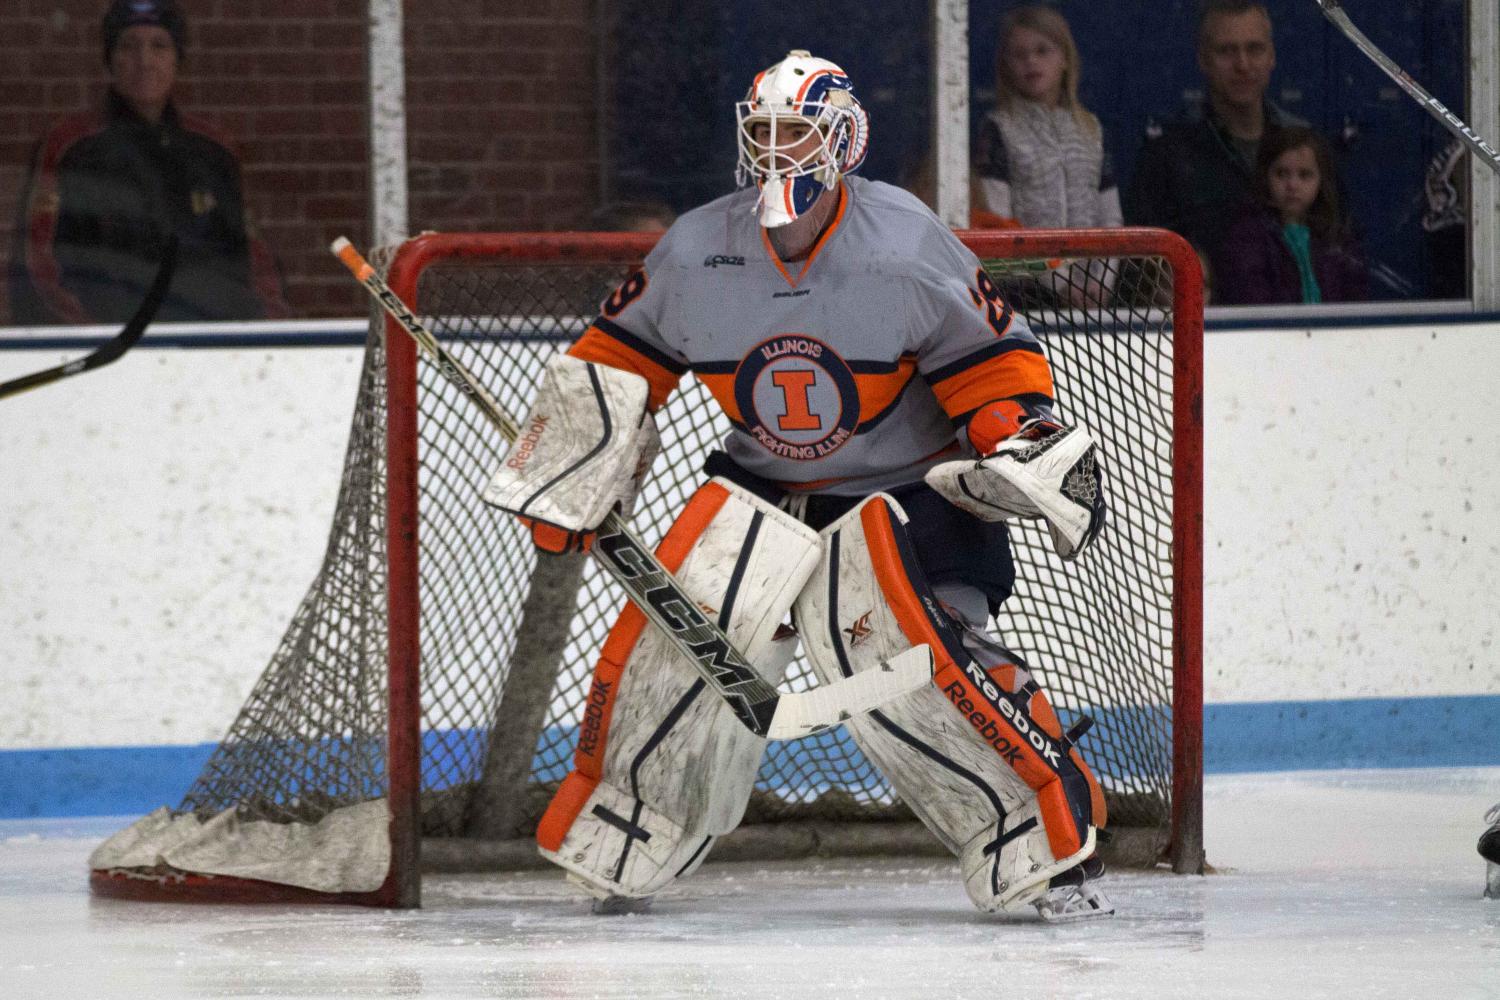 David Heflin stands in goal ready to block any shots from Robert Morris  at the Ice Arena on Feb. 17, 2017. Illinois beat Robert Morris 5-1.